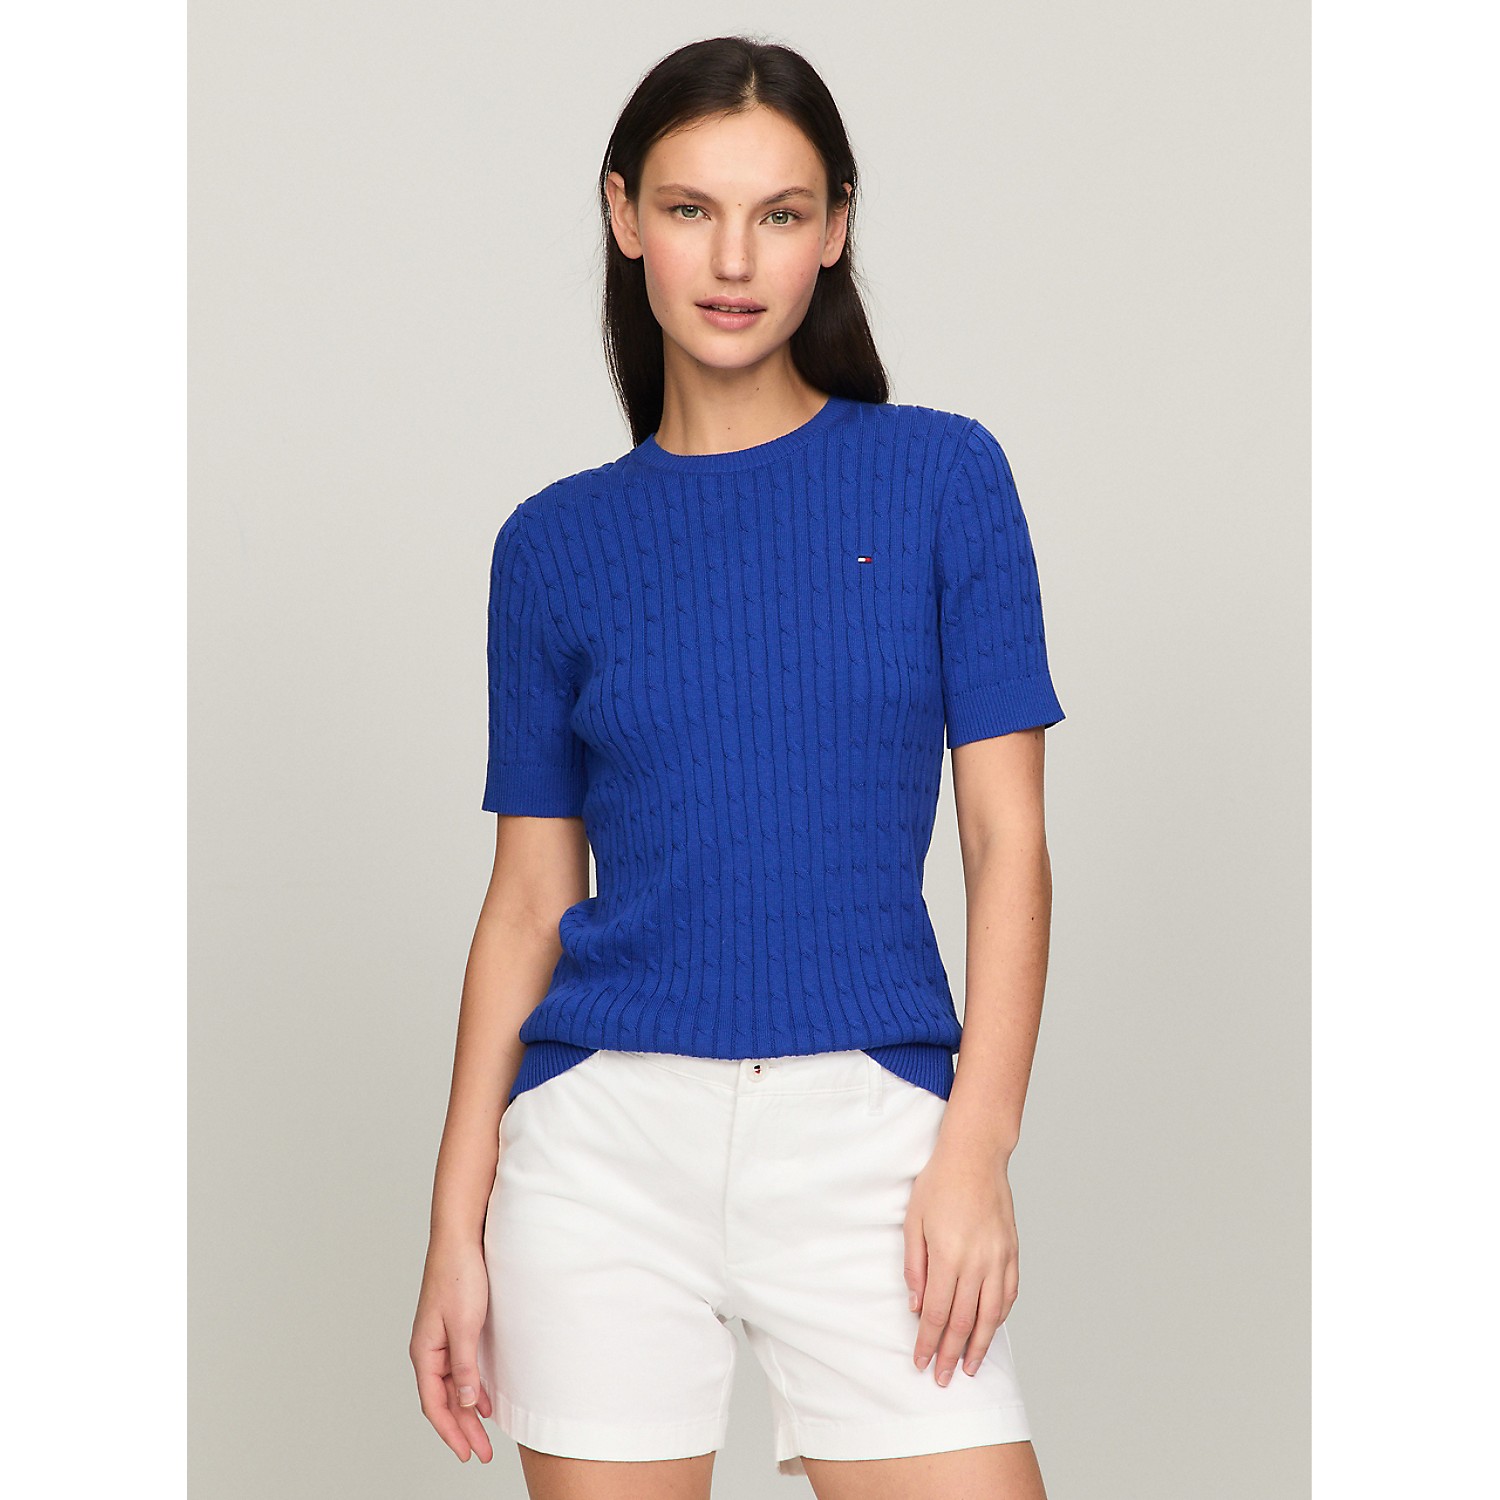 TOMMY HILFIGER Short-Sleeve Cable Sweater